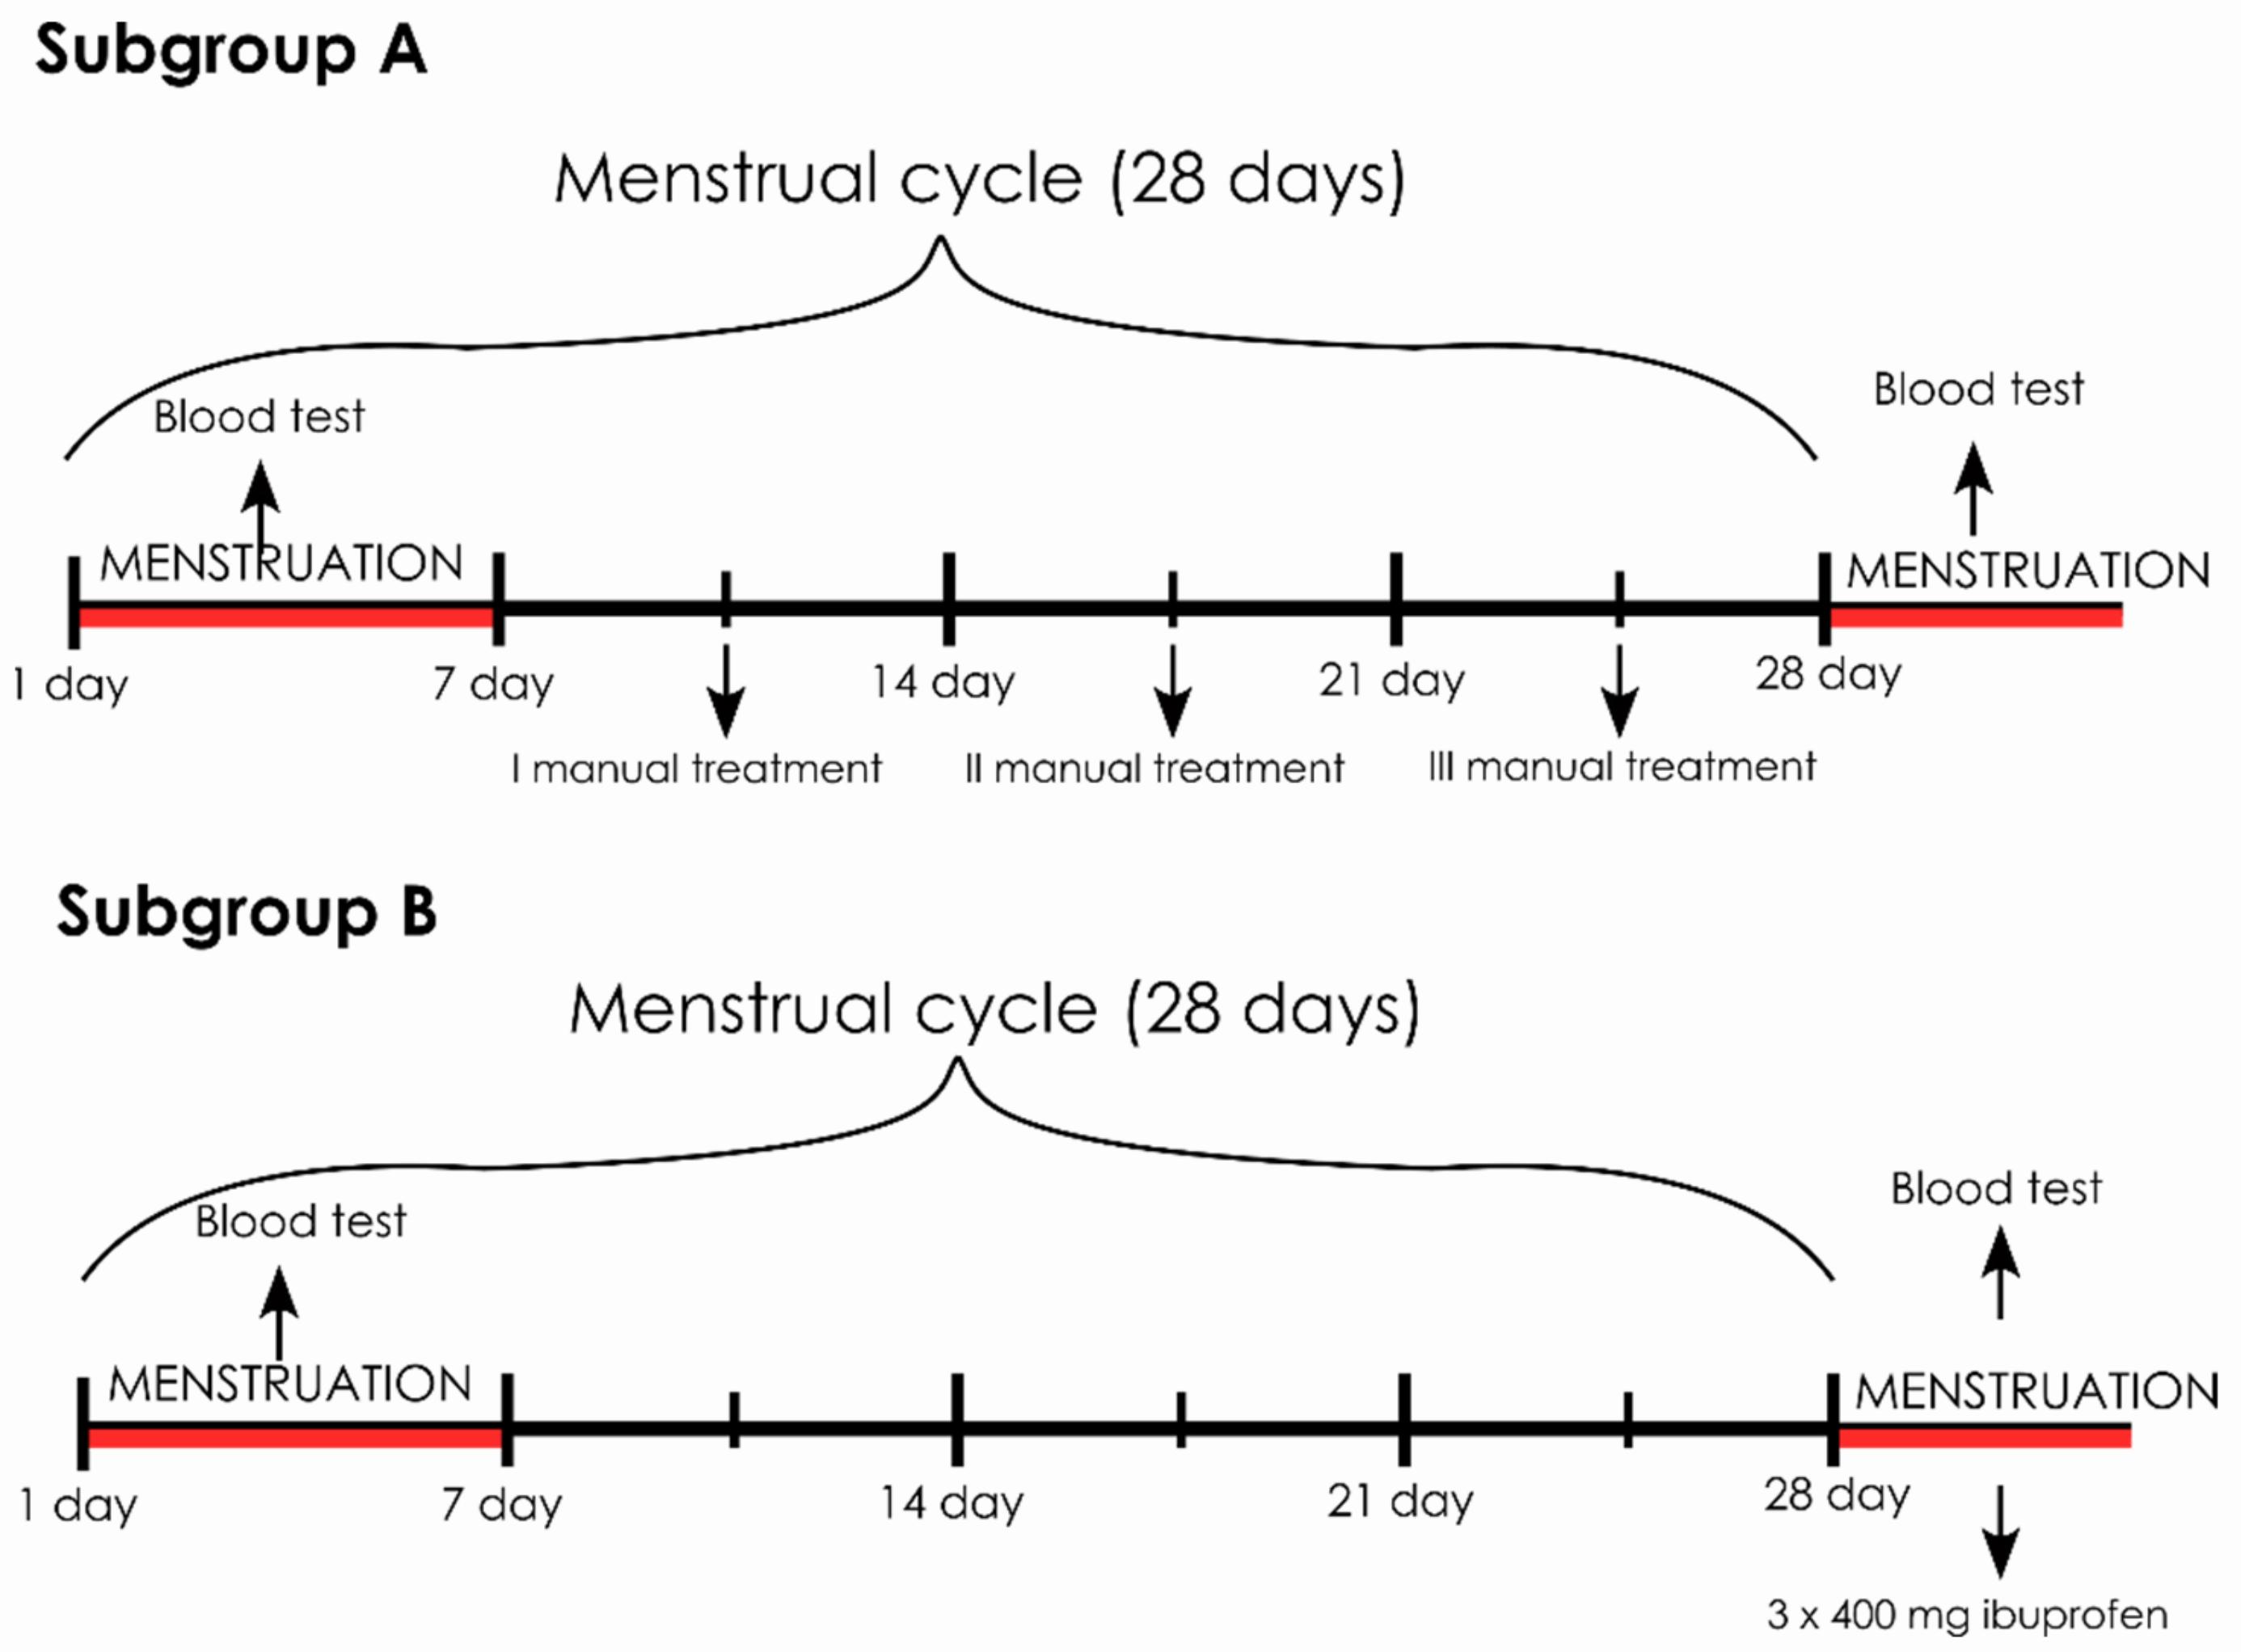 Two menstrual cycles are shown, each lasting 28 days. In both cycles, blood tests are taken on days 1 and 28. In subgroup A, manual treatments are given on days 7, 14, and 21. In subgroup B, 400 mg of ibuprofen is given three times on day 28.